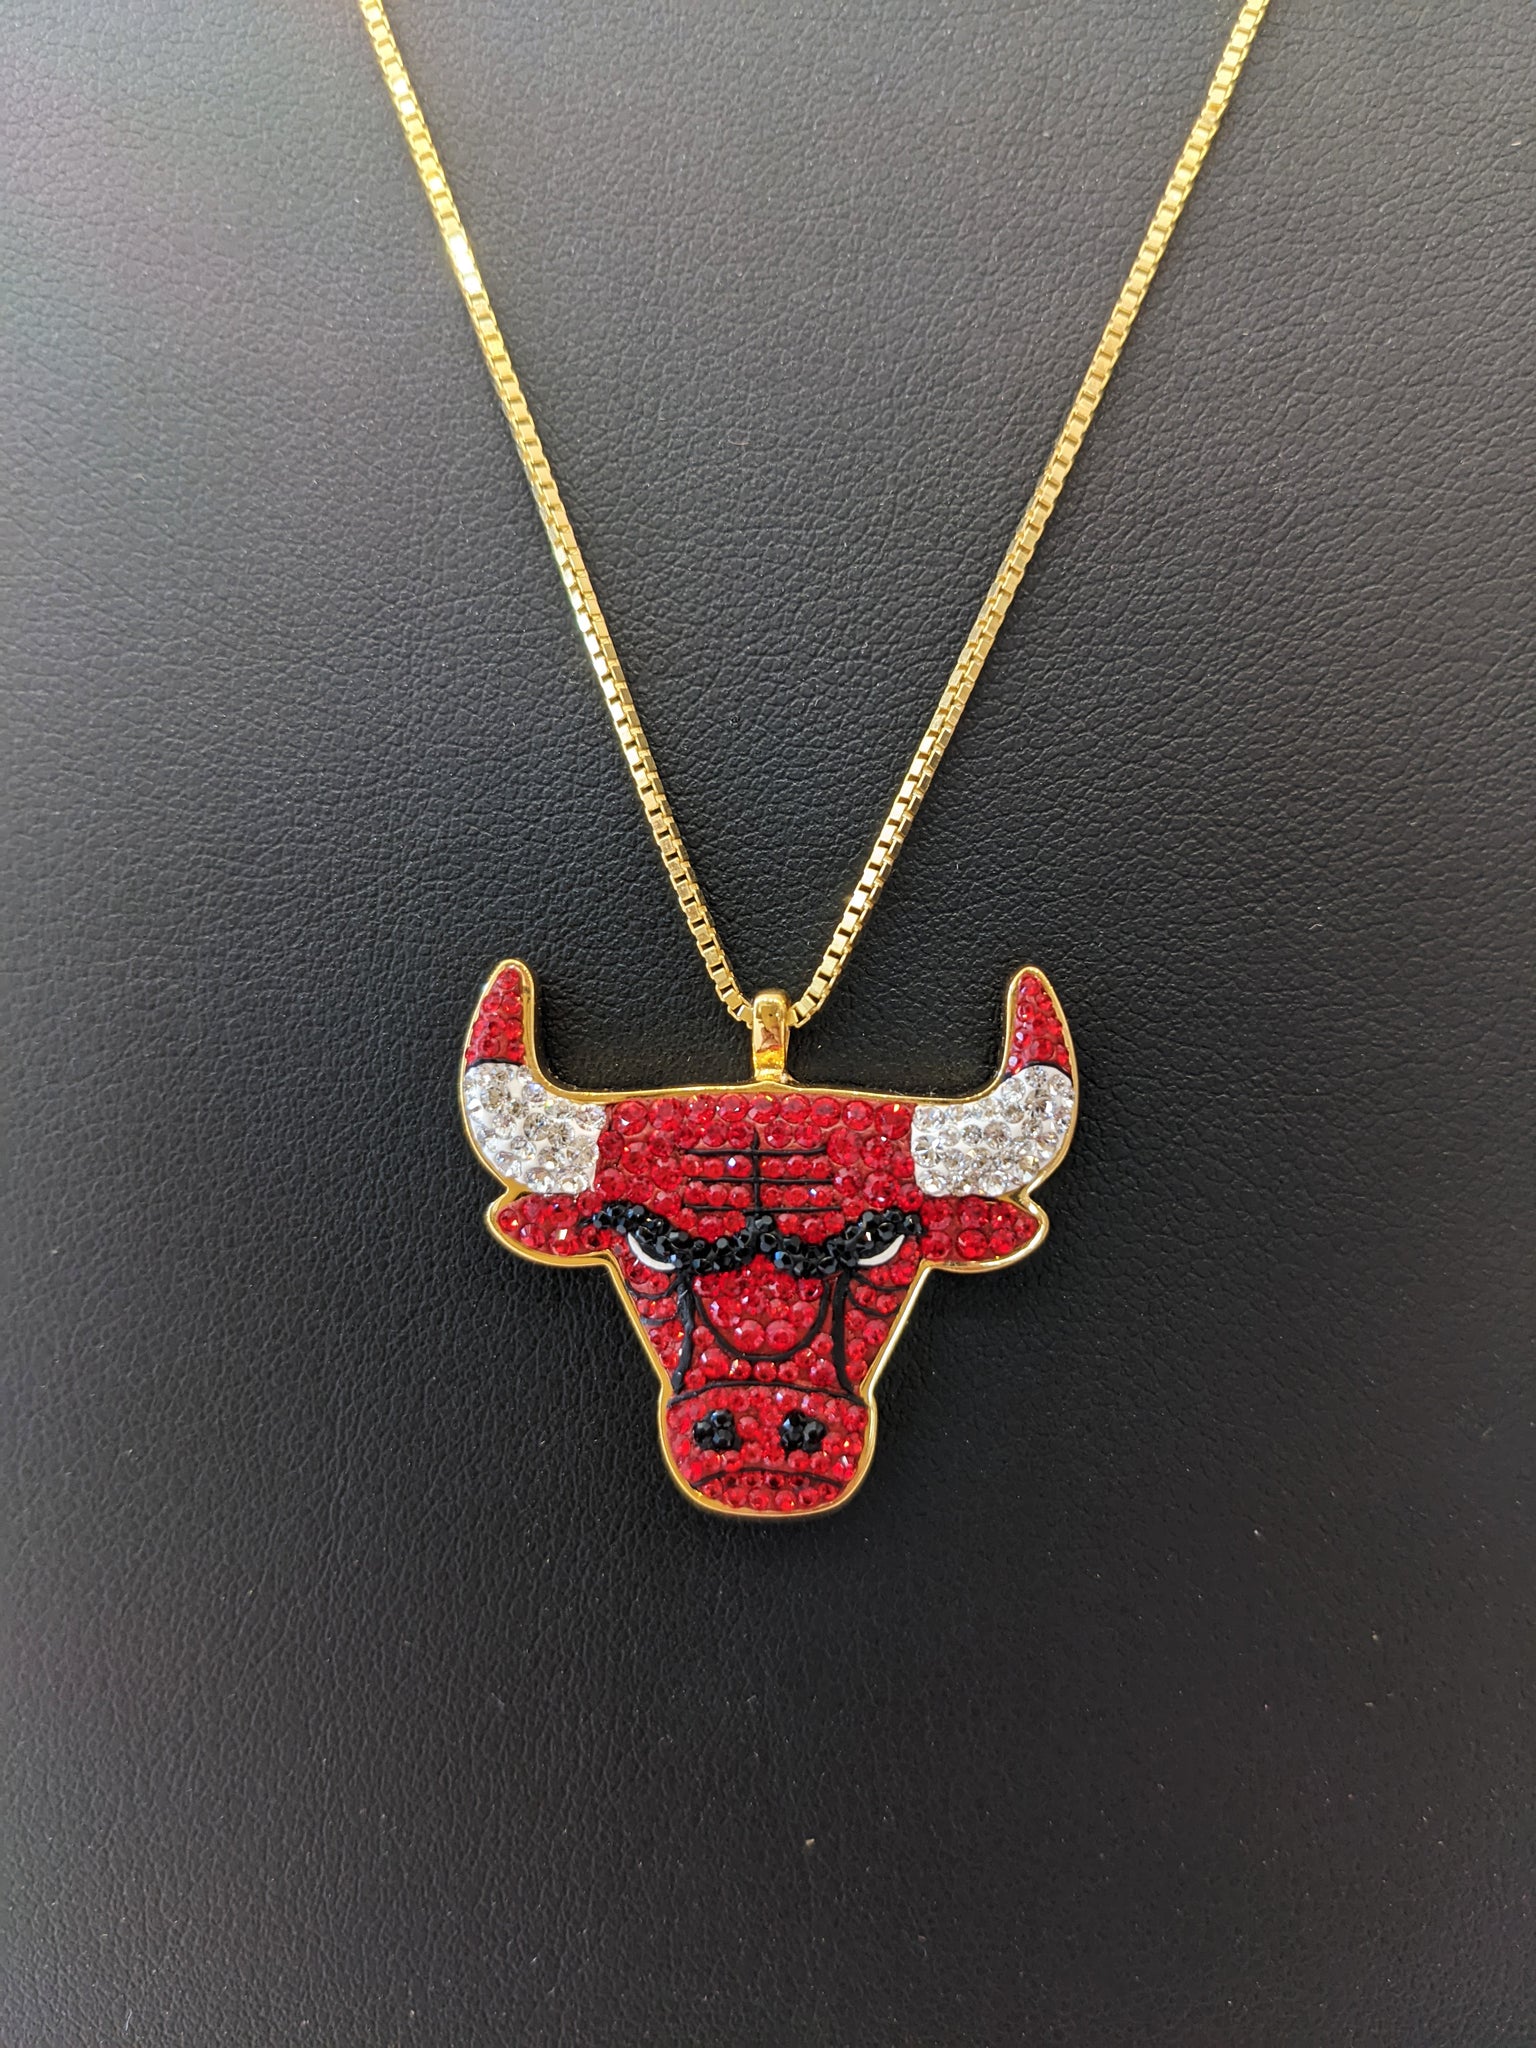 Chicago Bulls Necklace - AMCO Metal Chain and Pendant - $3.00 - Chicago  Bulls - Wholesale NBA Merchandise